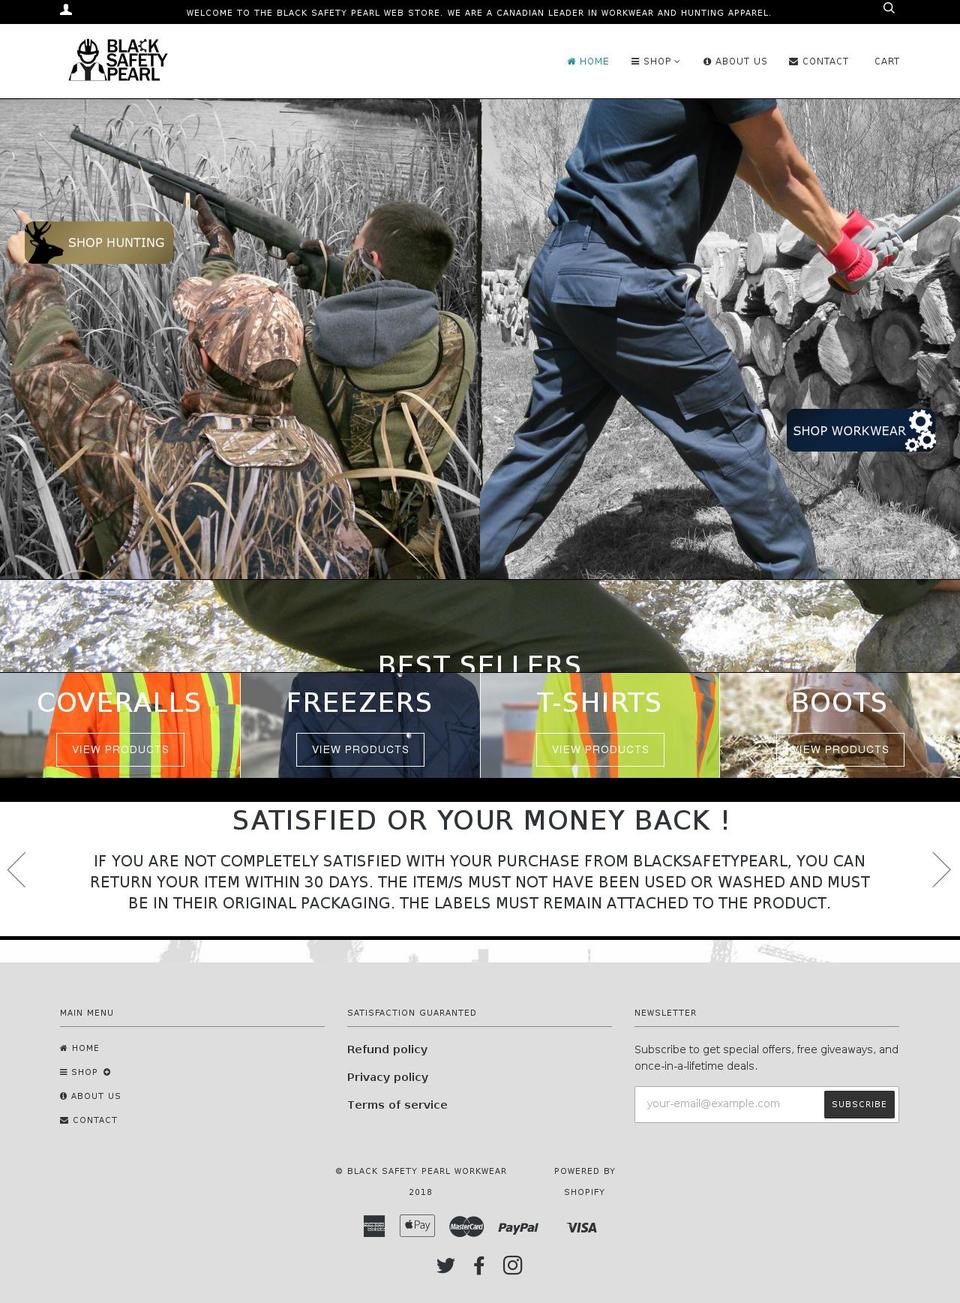 Blacksafetypearl - Pipeline Shopify theme site example hivisibilityworkwear.com